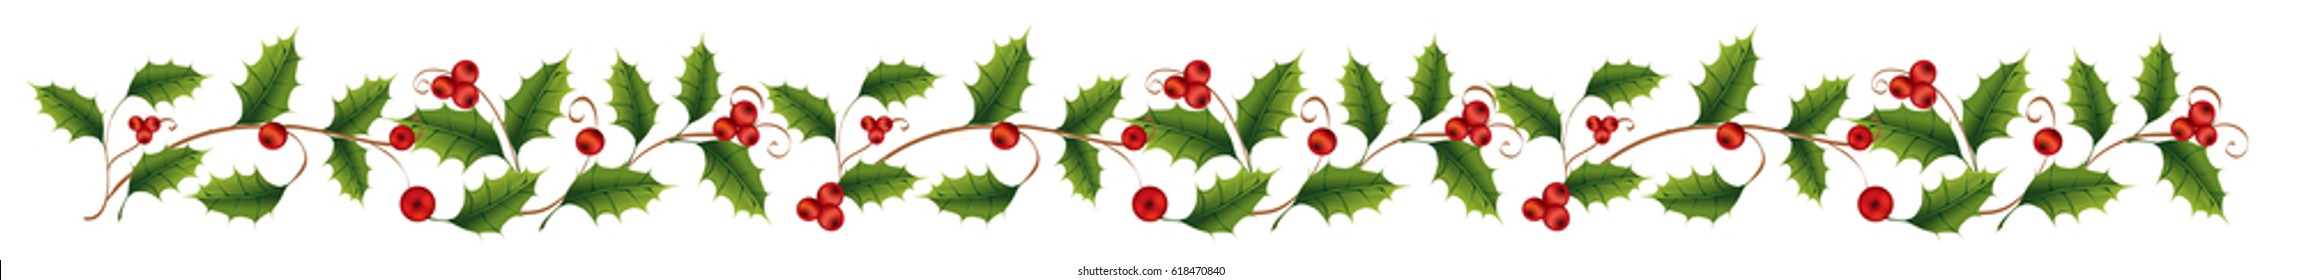 long pattern of berries and leaves of holly